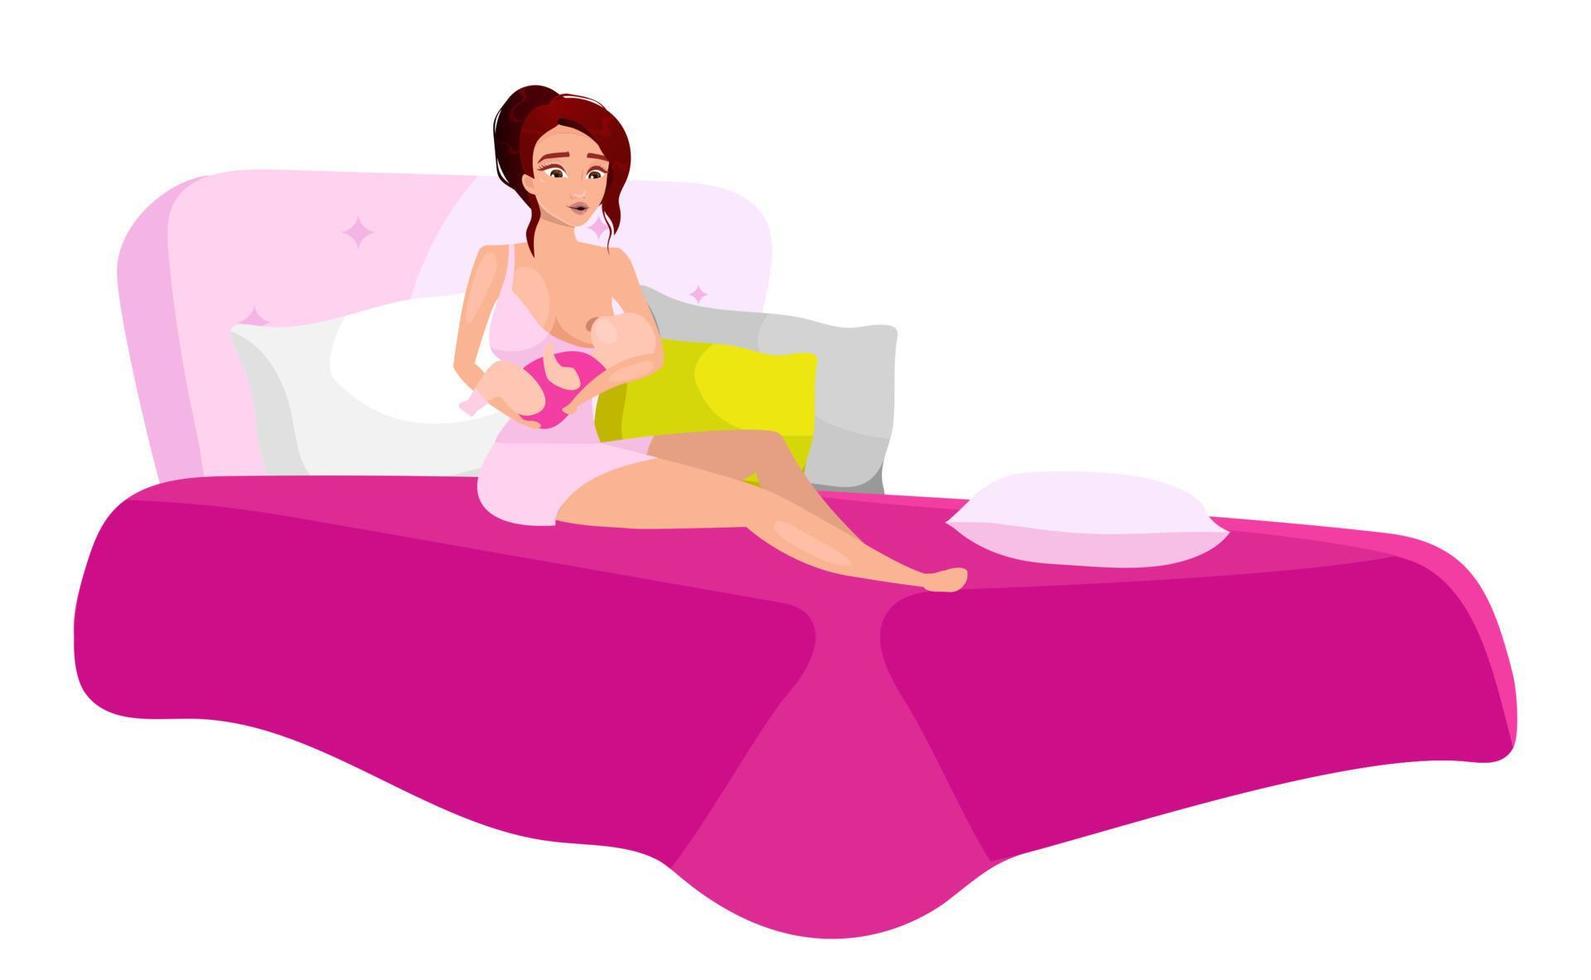 Mother feeding baby flat vector illustration. Young beautiful woman breastfeeding at home on bed cartoon character isolated on white. Maternity and childcare concept. Mother nursing baby